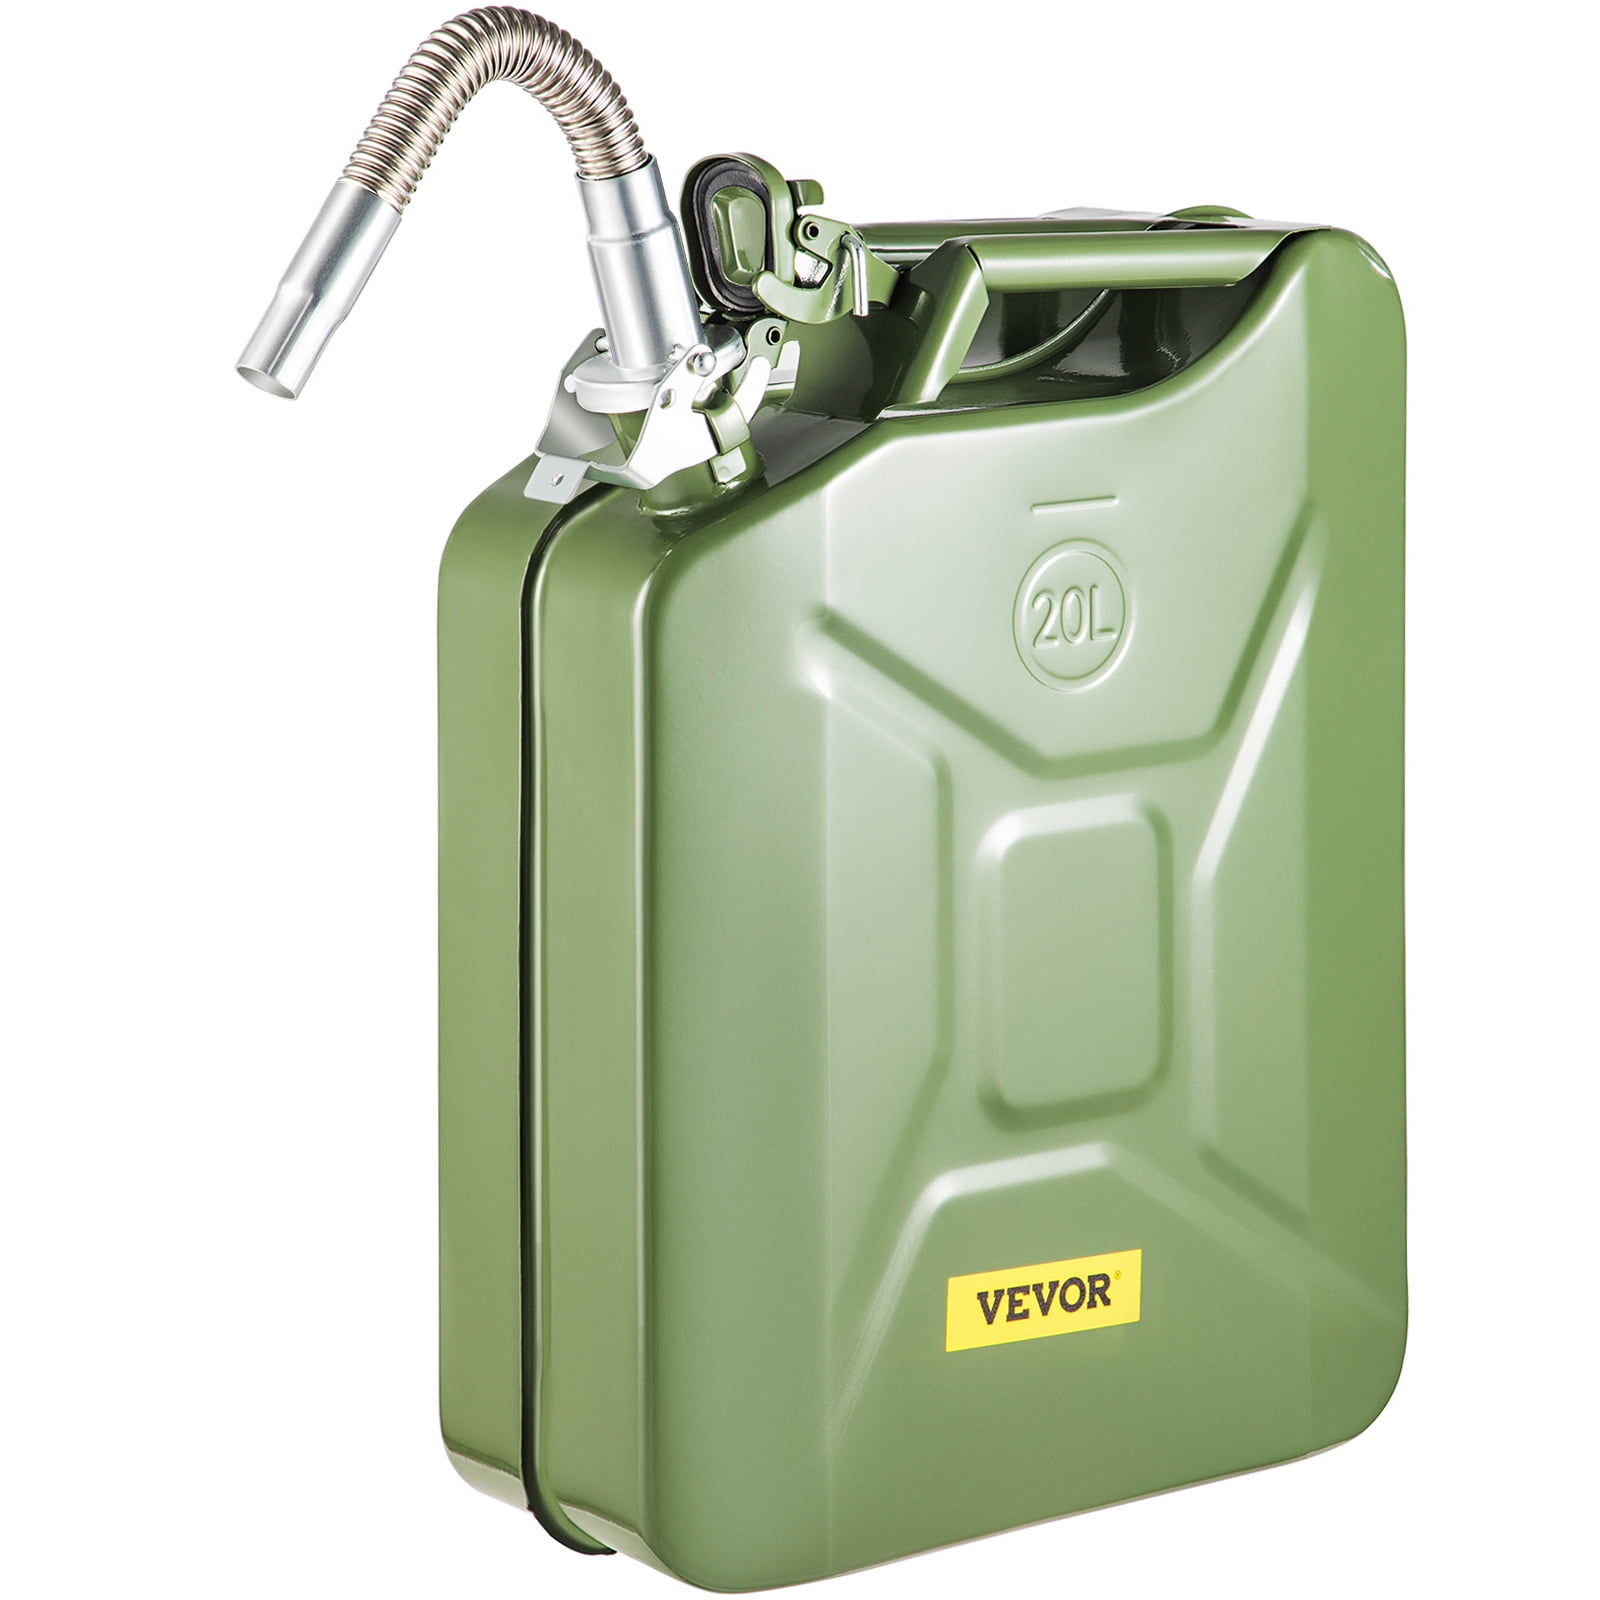 20L, Green Portable Metal Jerry Can Petrol Can with Spout Petrol Can 20 Litre Motorcycle Fuel Container Tank 